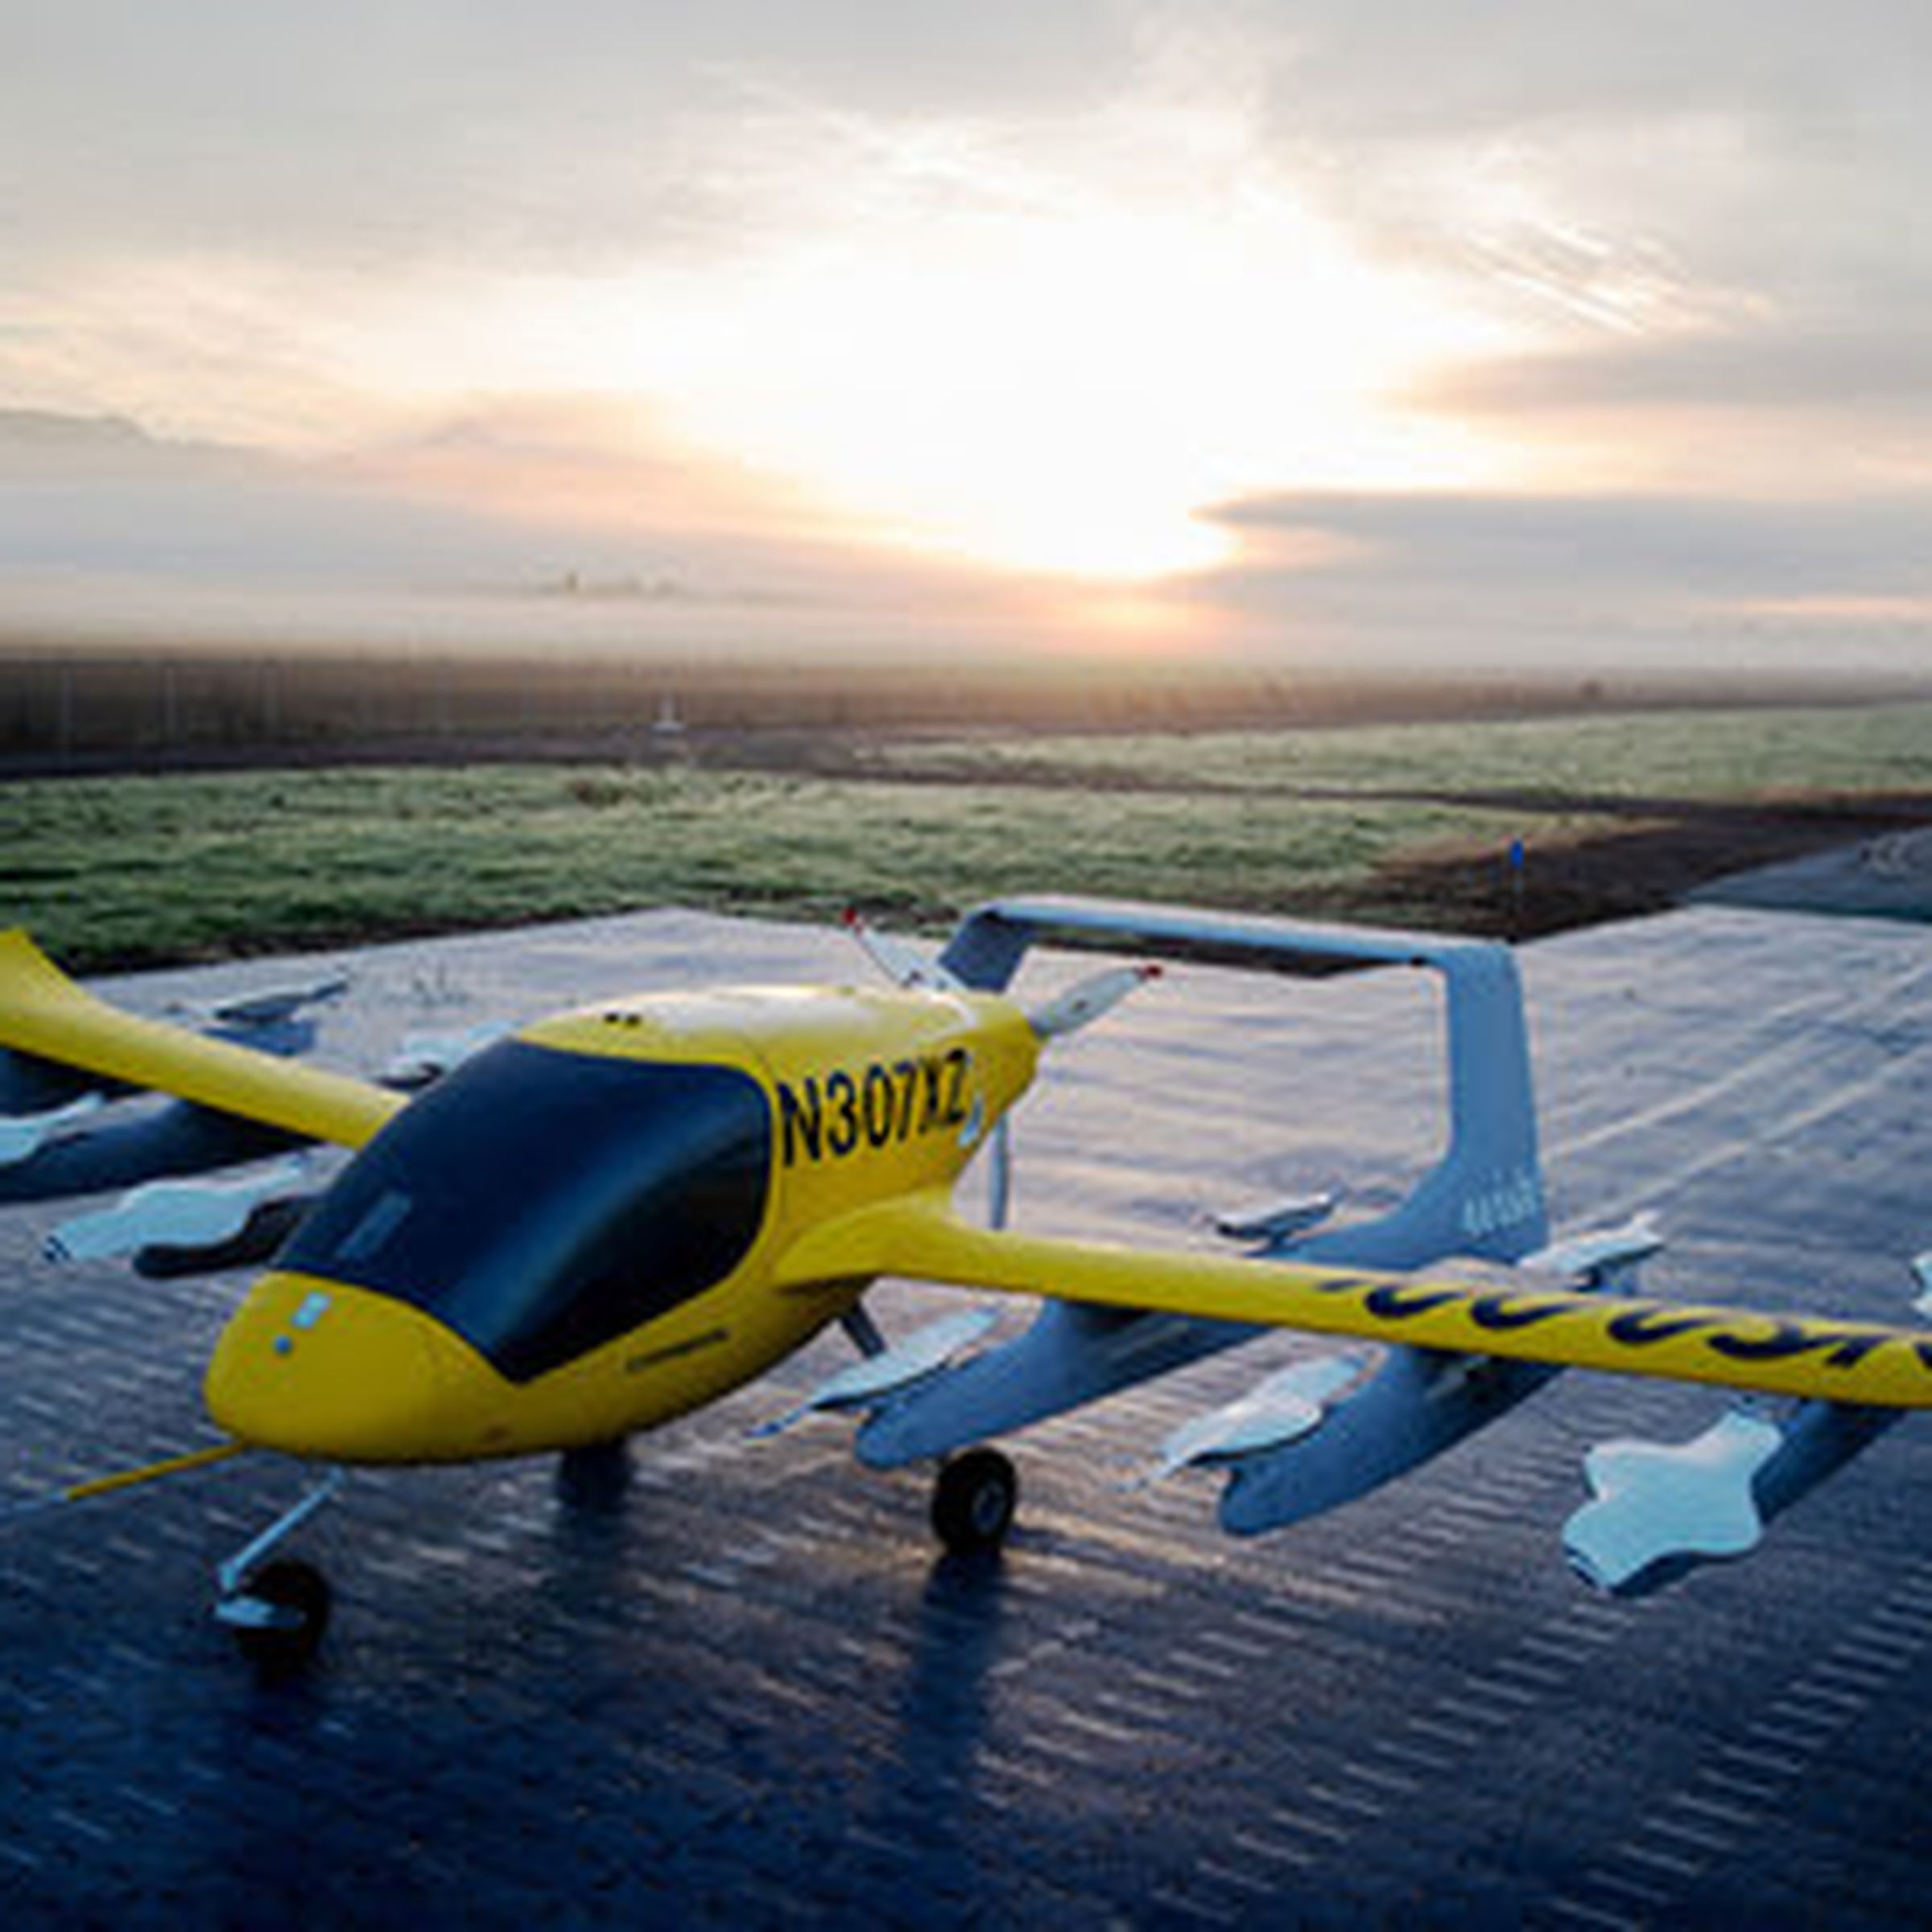 Wisk electric air taxi